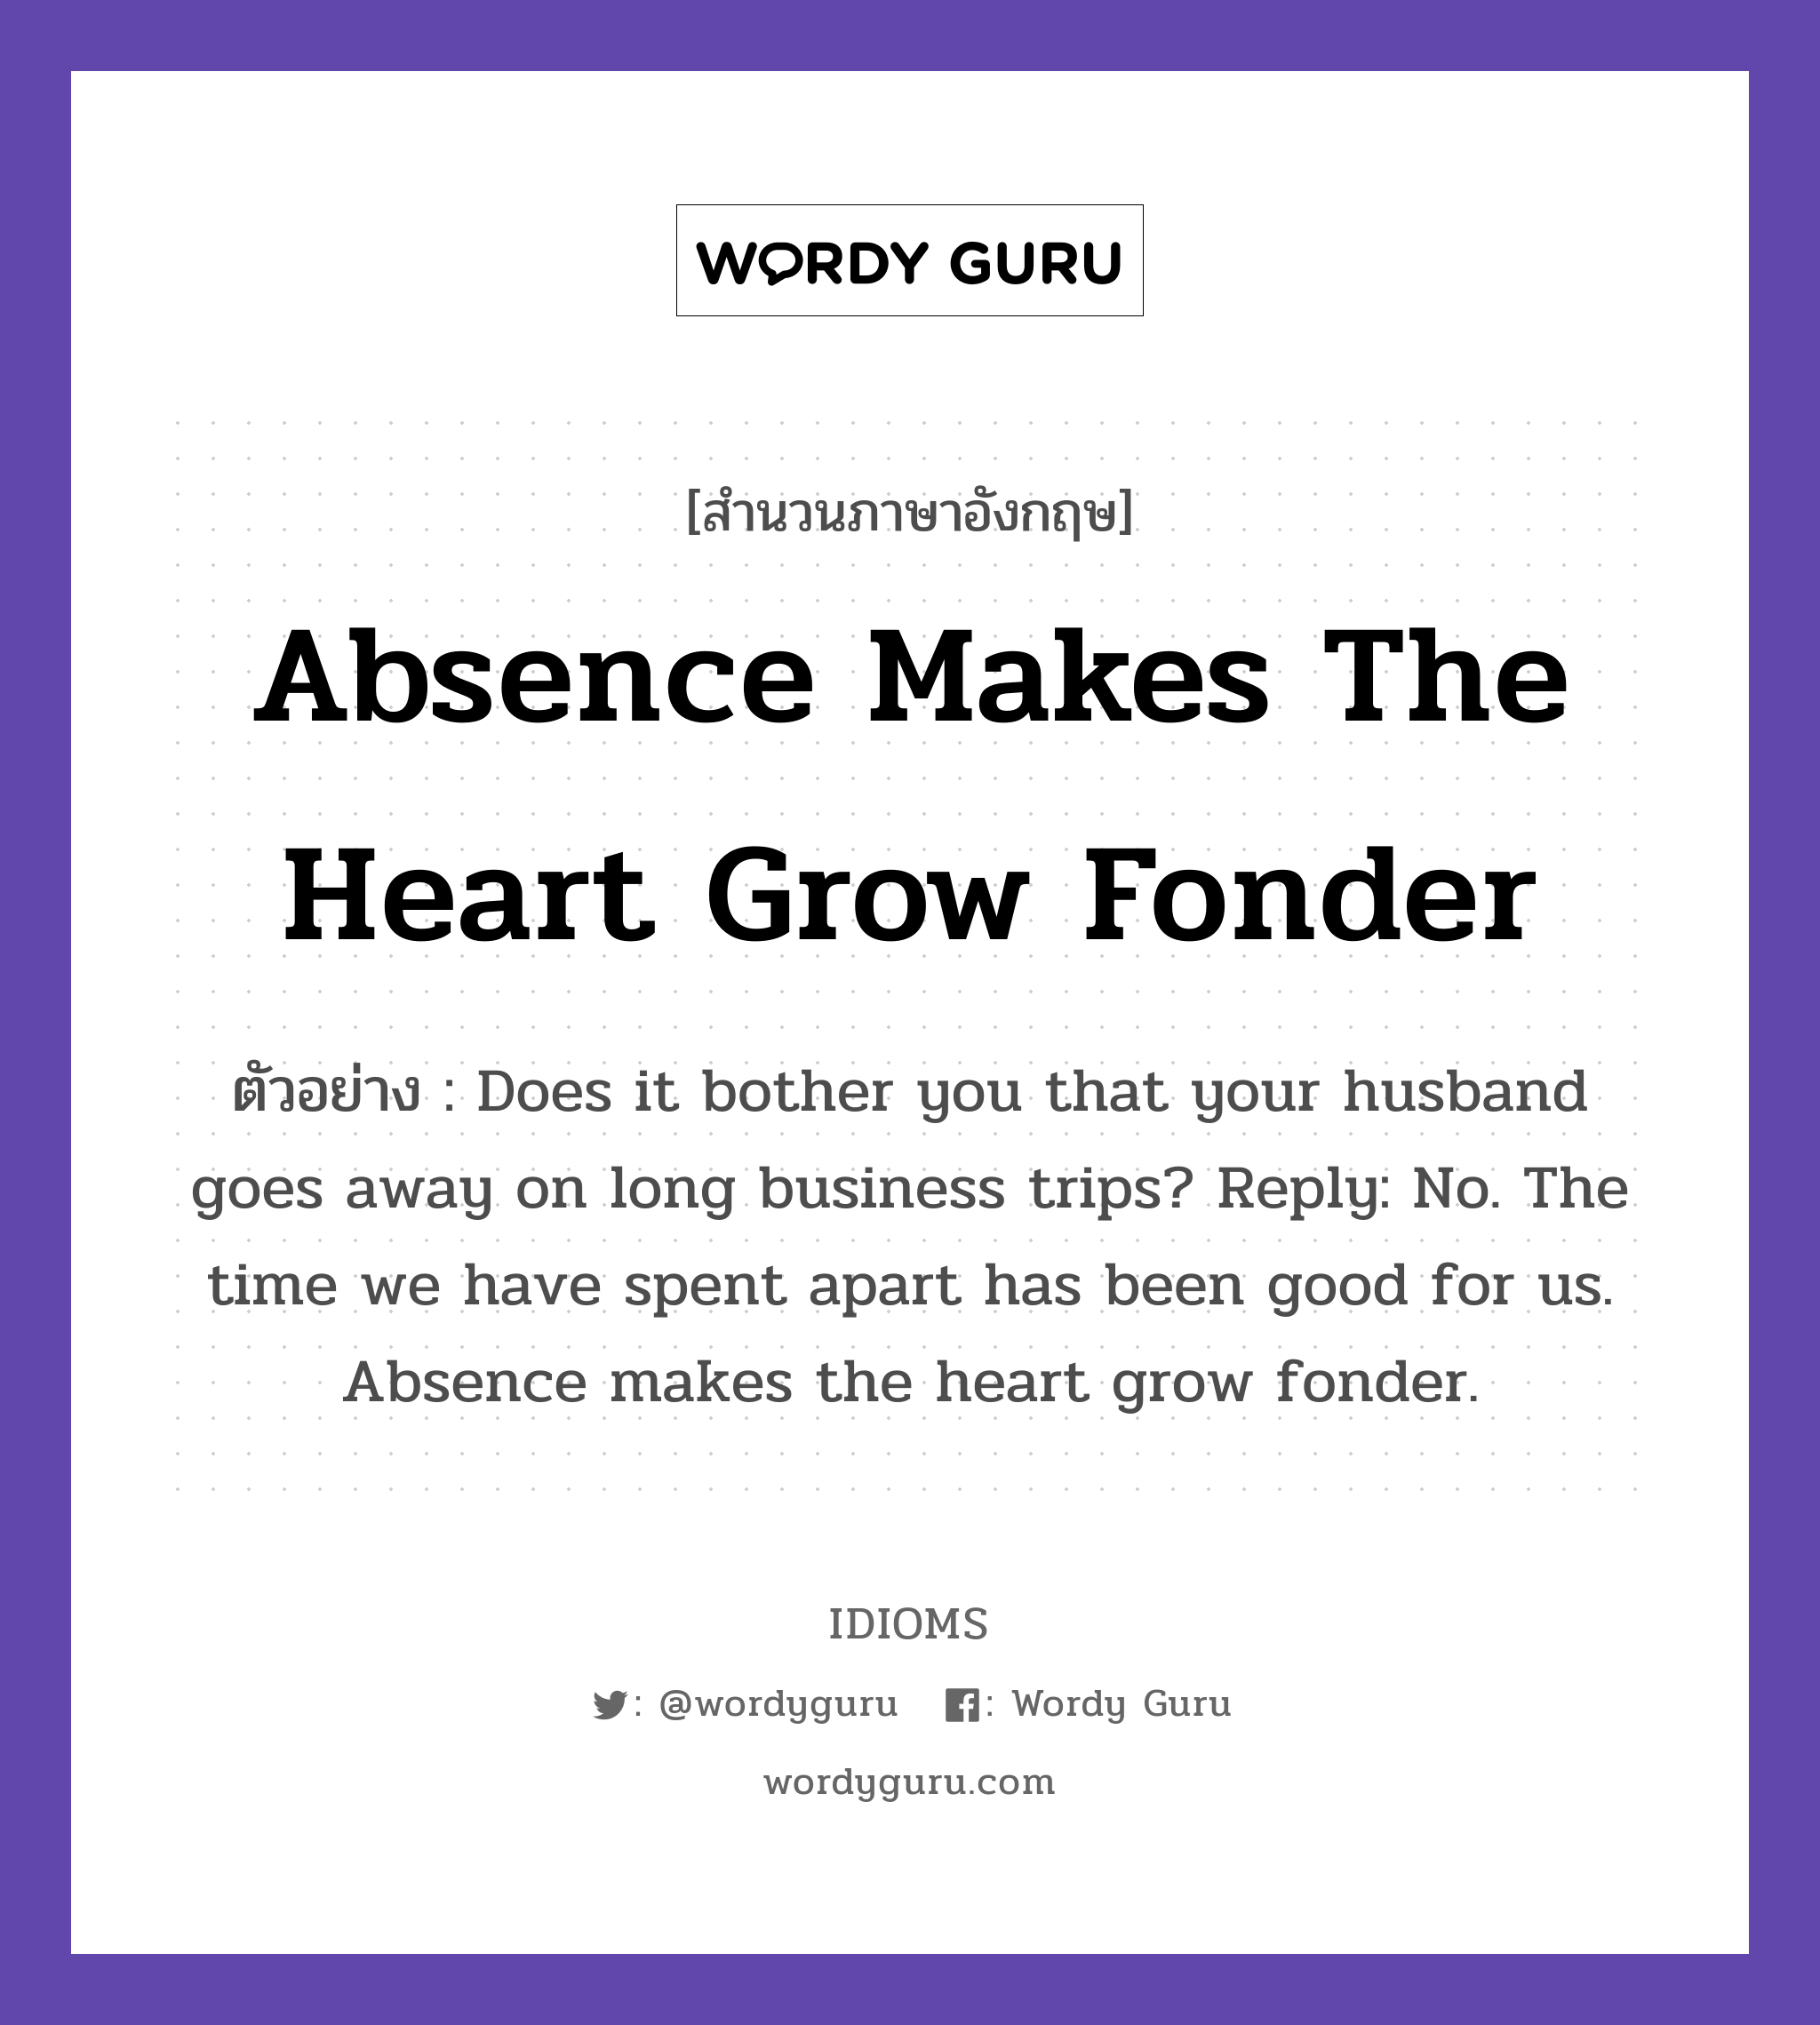 Absence Makes The Heart Grow Fonder แปลว่า?, สำนวนภาษาอังกฤษ Absence Makes The Heart Grow Fonder ตัวอย่าง Does it bother you that your husband goes away on long business trips? Reply: No. The time we have spent apart has been good for us. Absence makes the heart grow fonder.